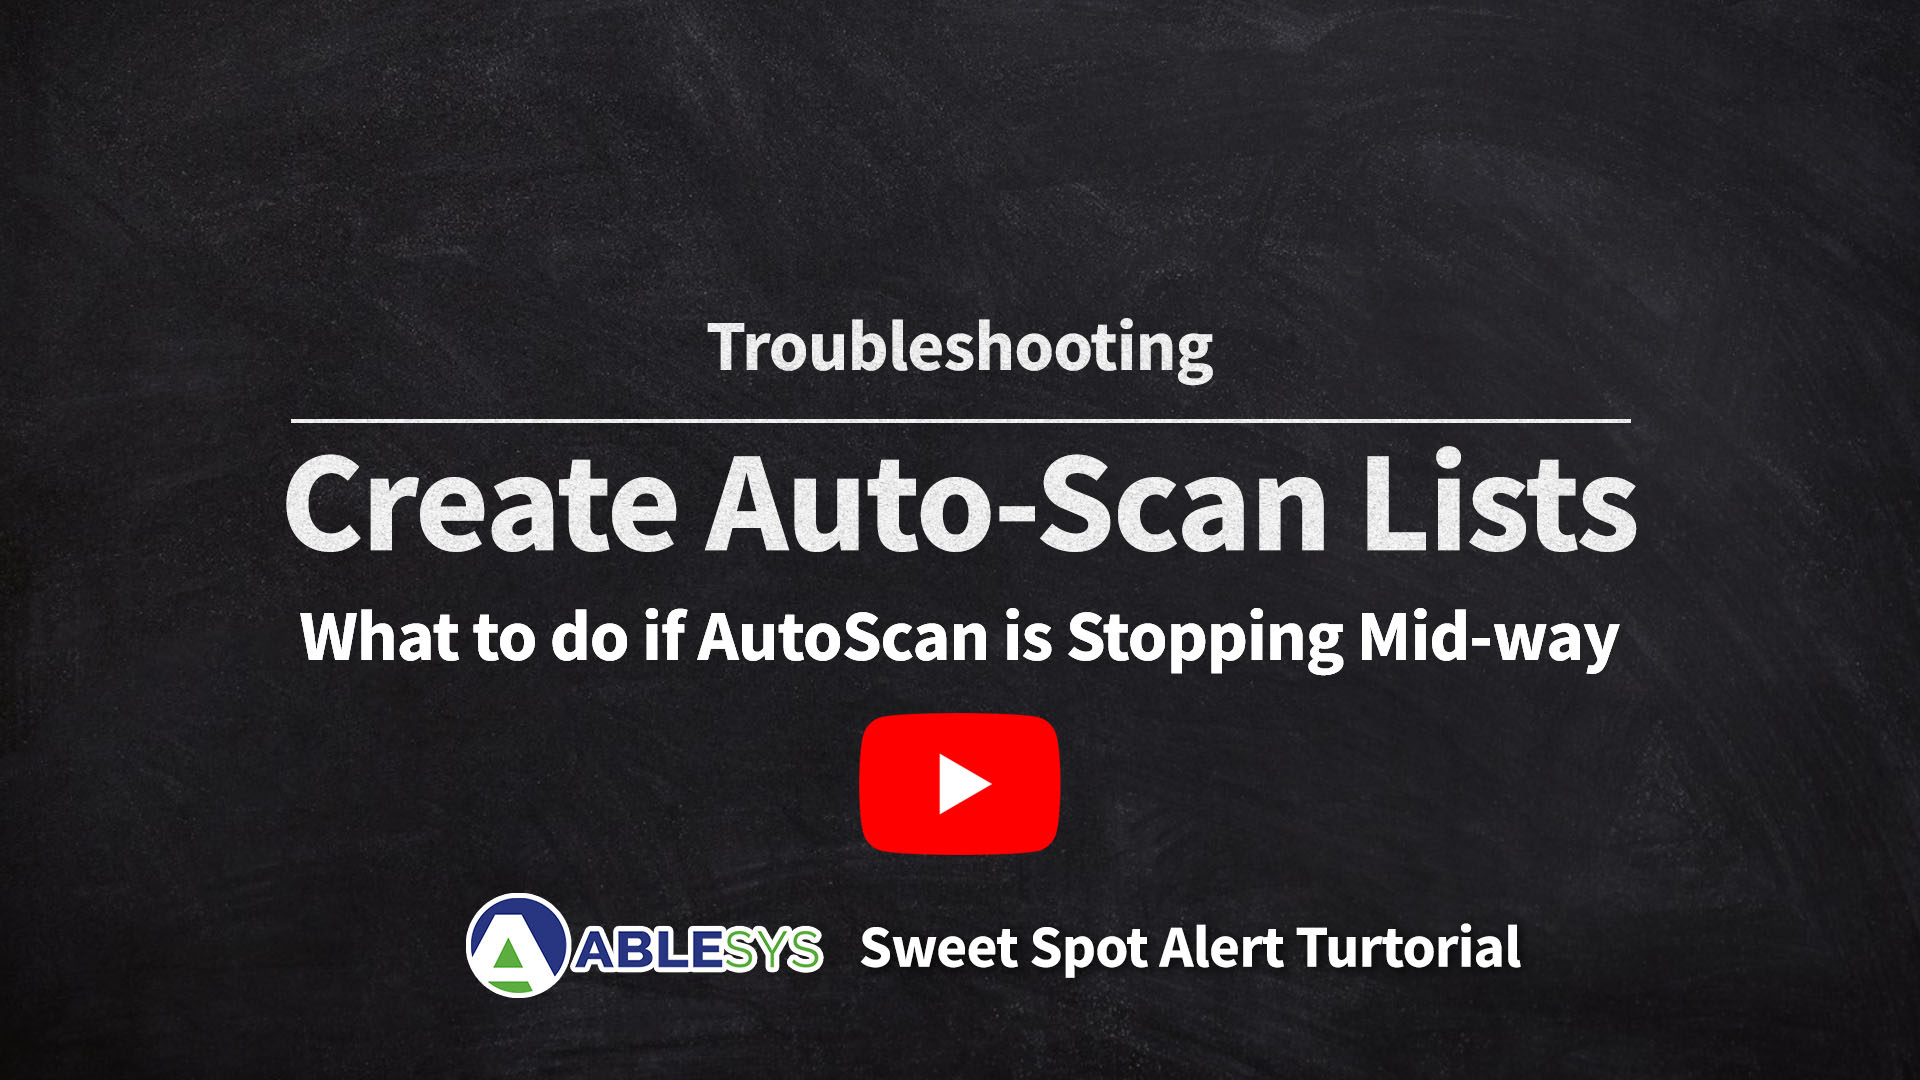 What to do if AutoScan is Stopping Mid-way